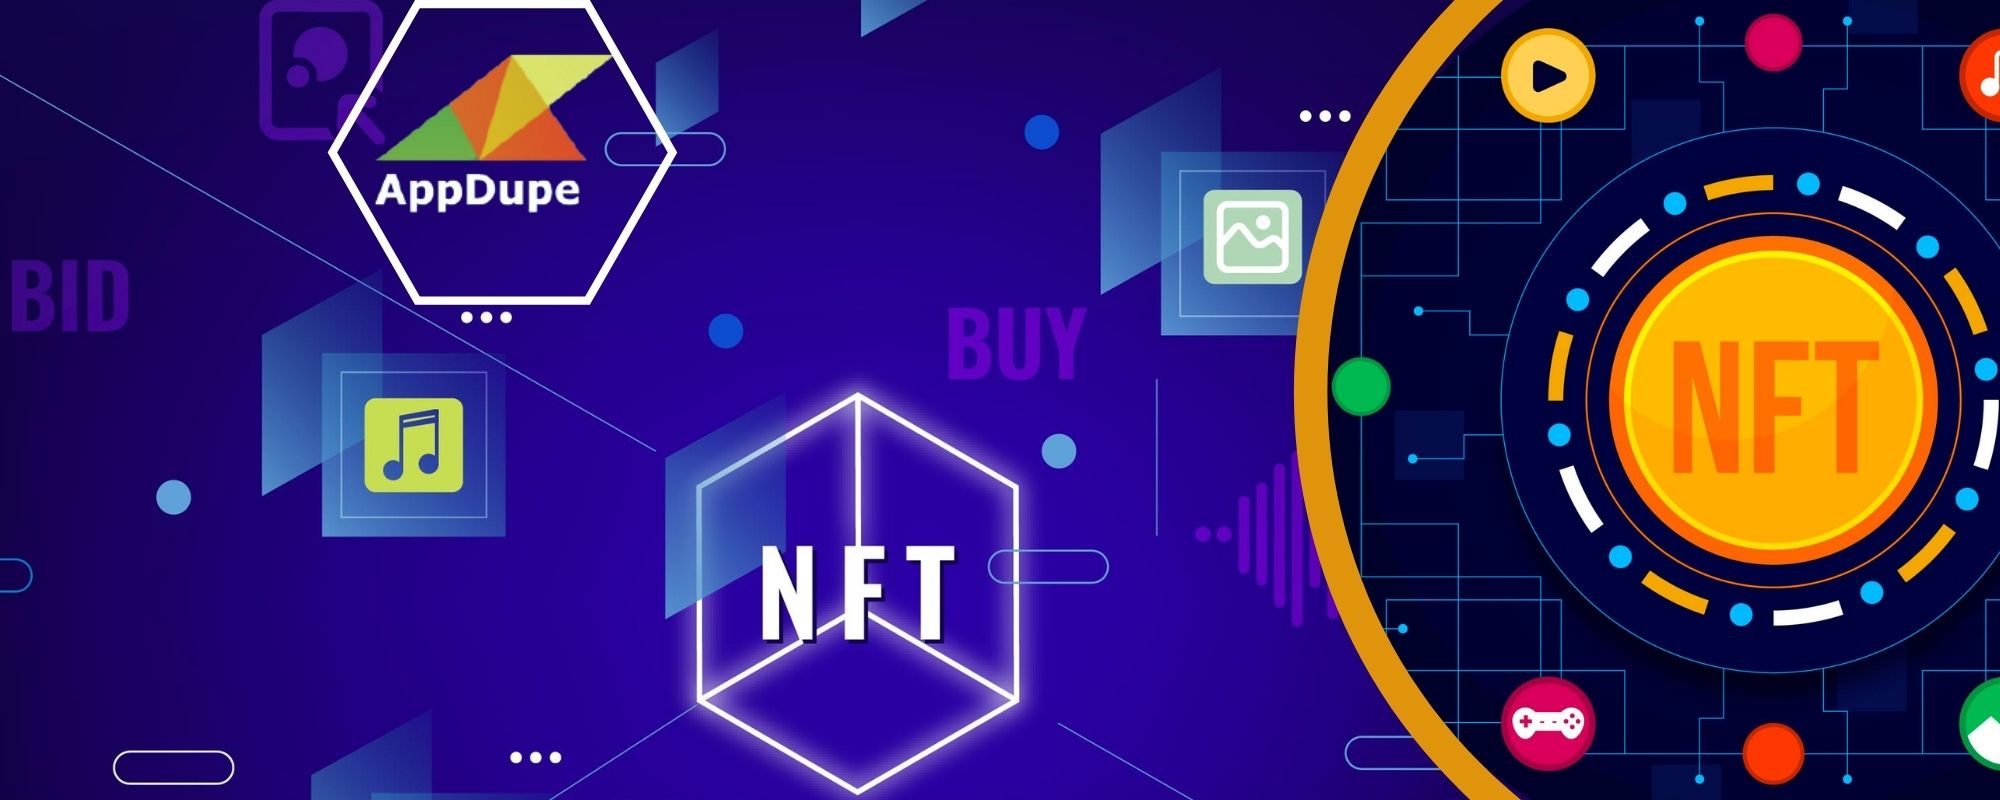 Article about How to Create NFT Marketplace | Launch your own NFT Marketplace platform